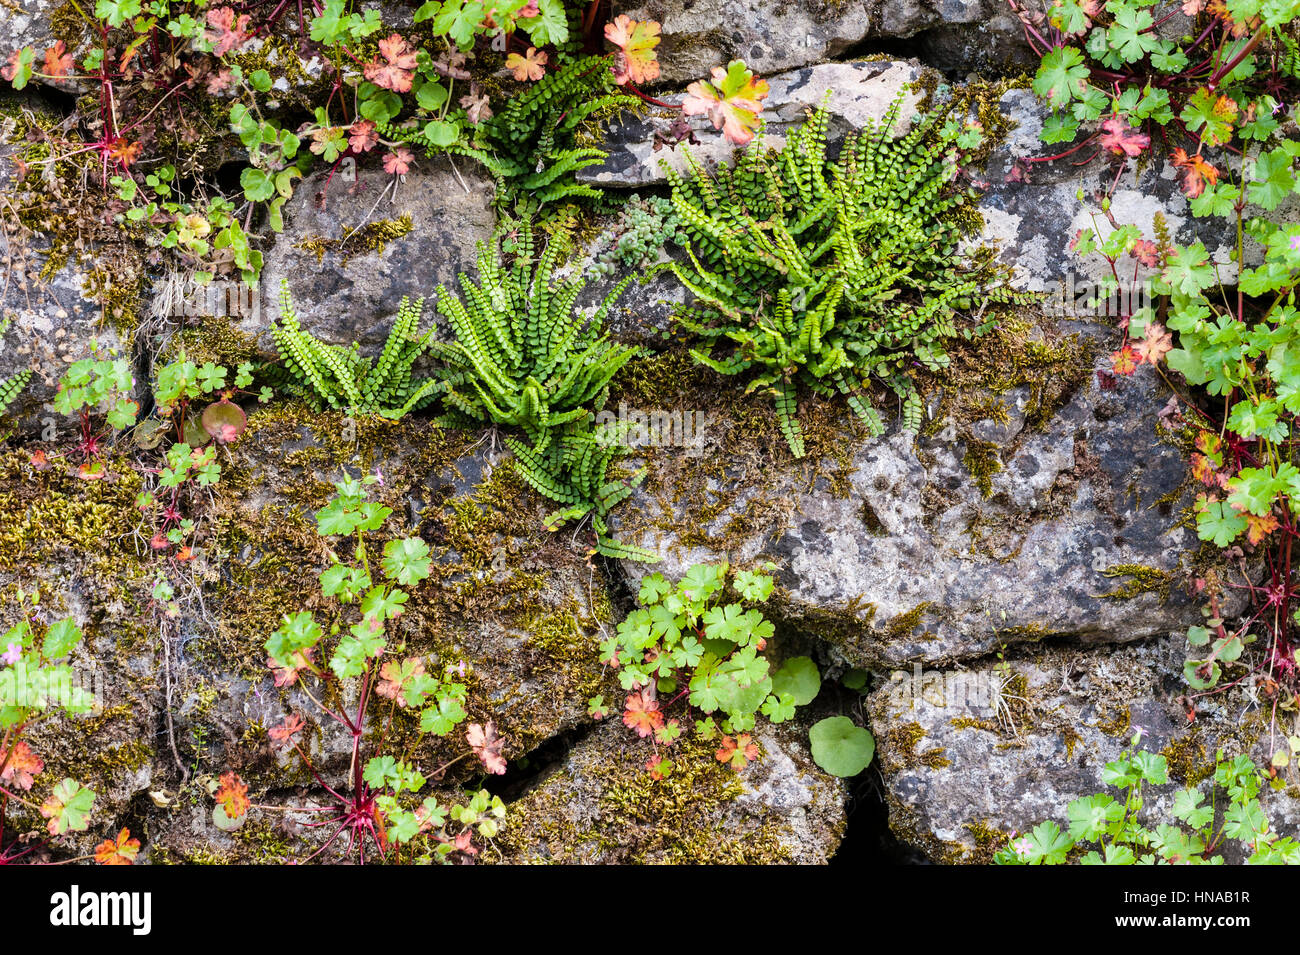 Dry-stone wall with plants Stock Photo